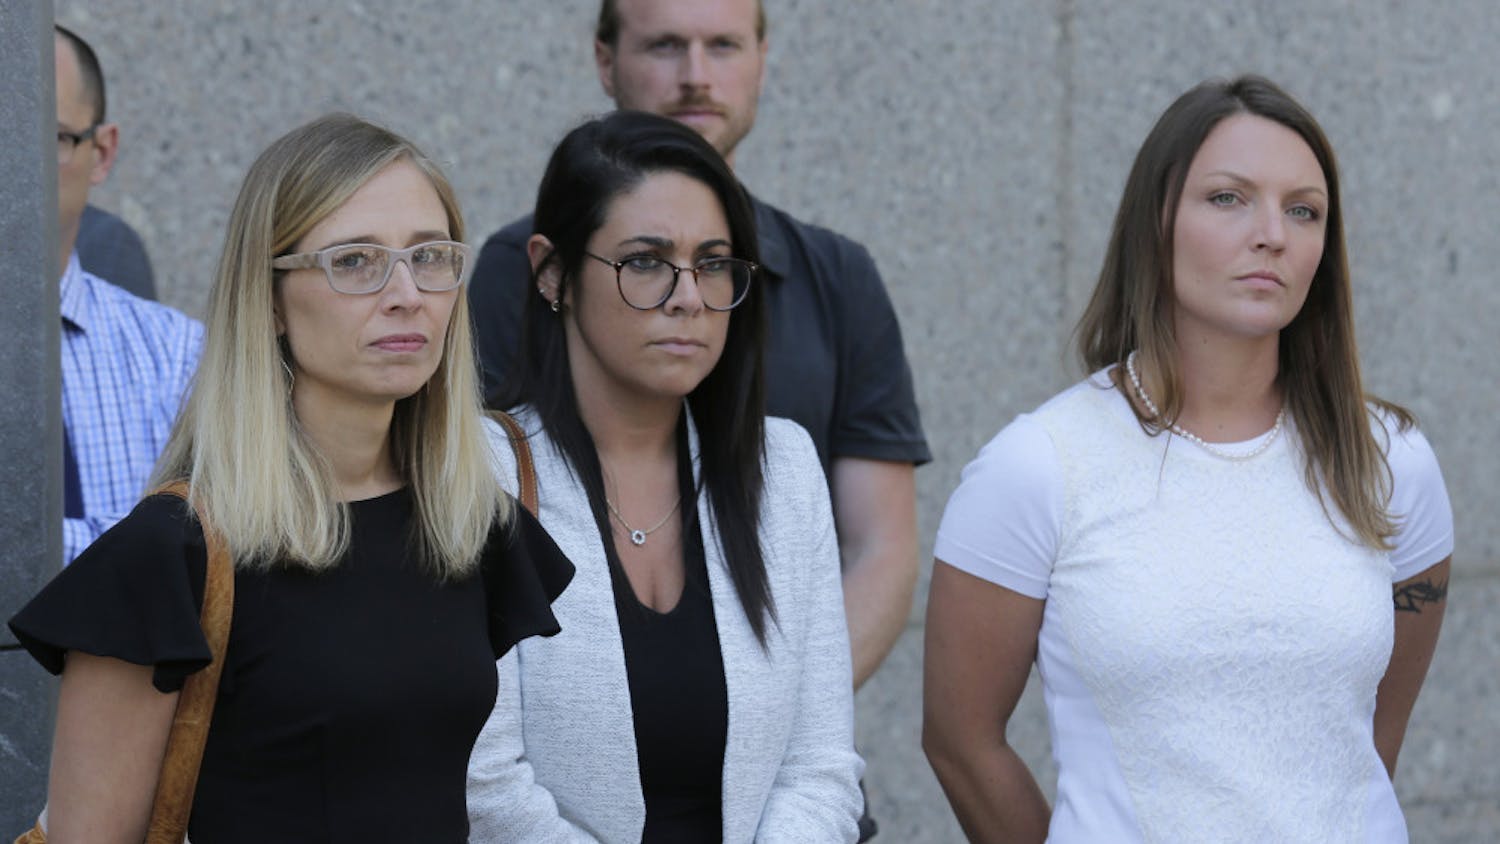 Annie Farmer, left, and Courtney Wild, right, accusers of Jeffery Epstein, stand outside the courthouse in New York, Monday, July 15, 2019. Financier Jeffrey Epstein will remain behind bars for now as a federal judge mulls whether to grant bail on charges he sexually abused underage girls.